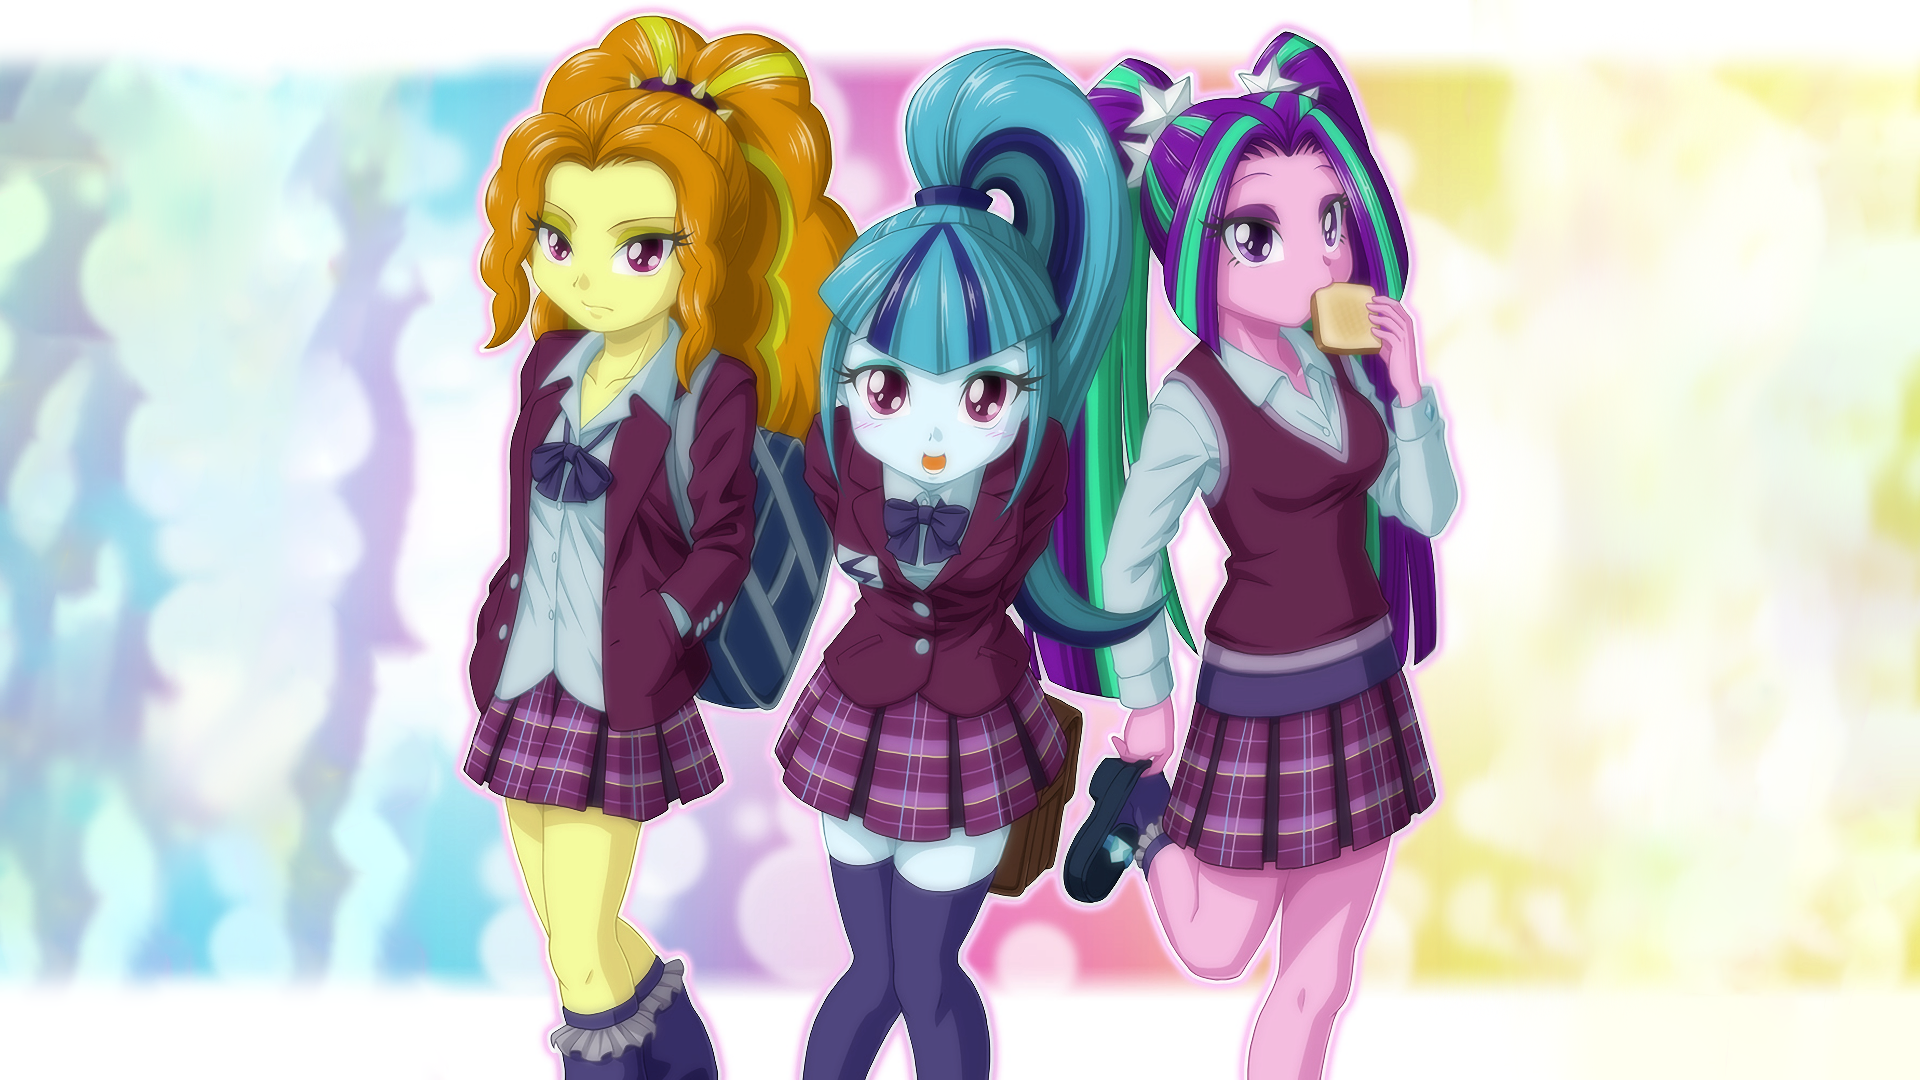 Movie My Little Pony: Equestria Girls - Friendship Games HD Wallpaper by uotapo